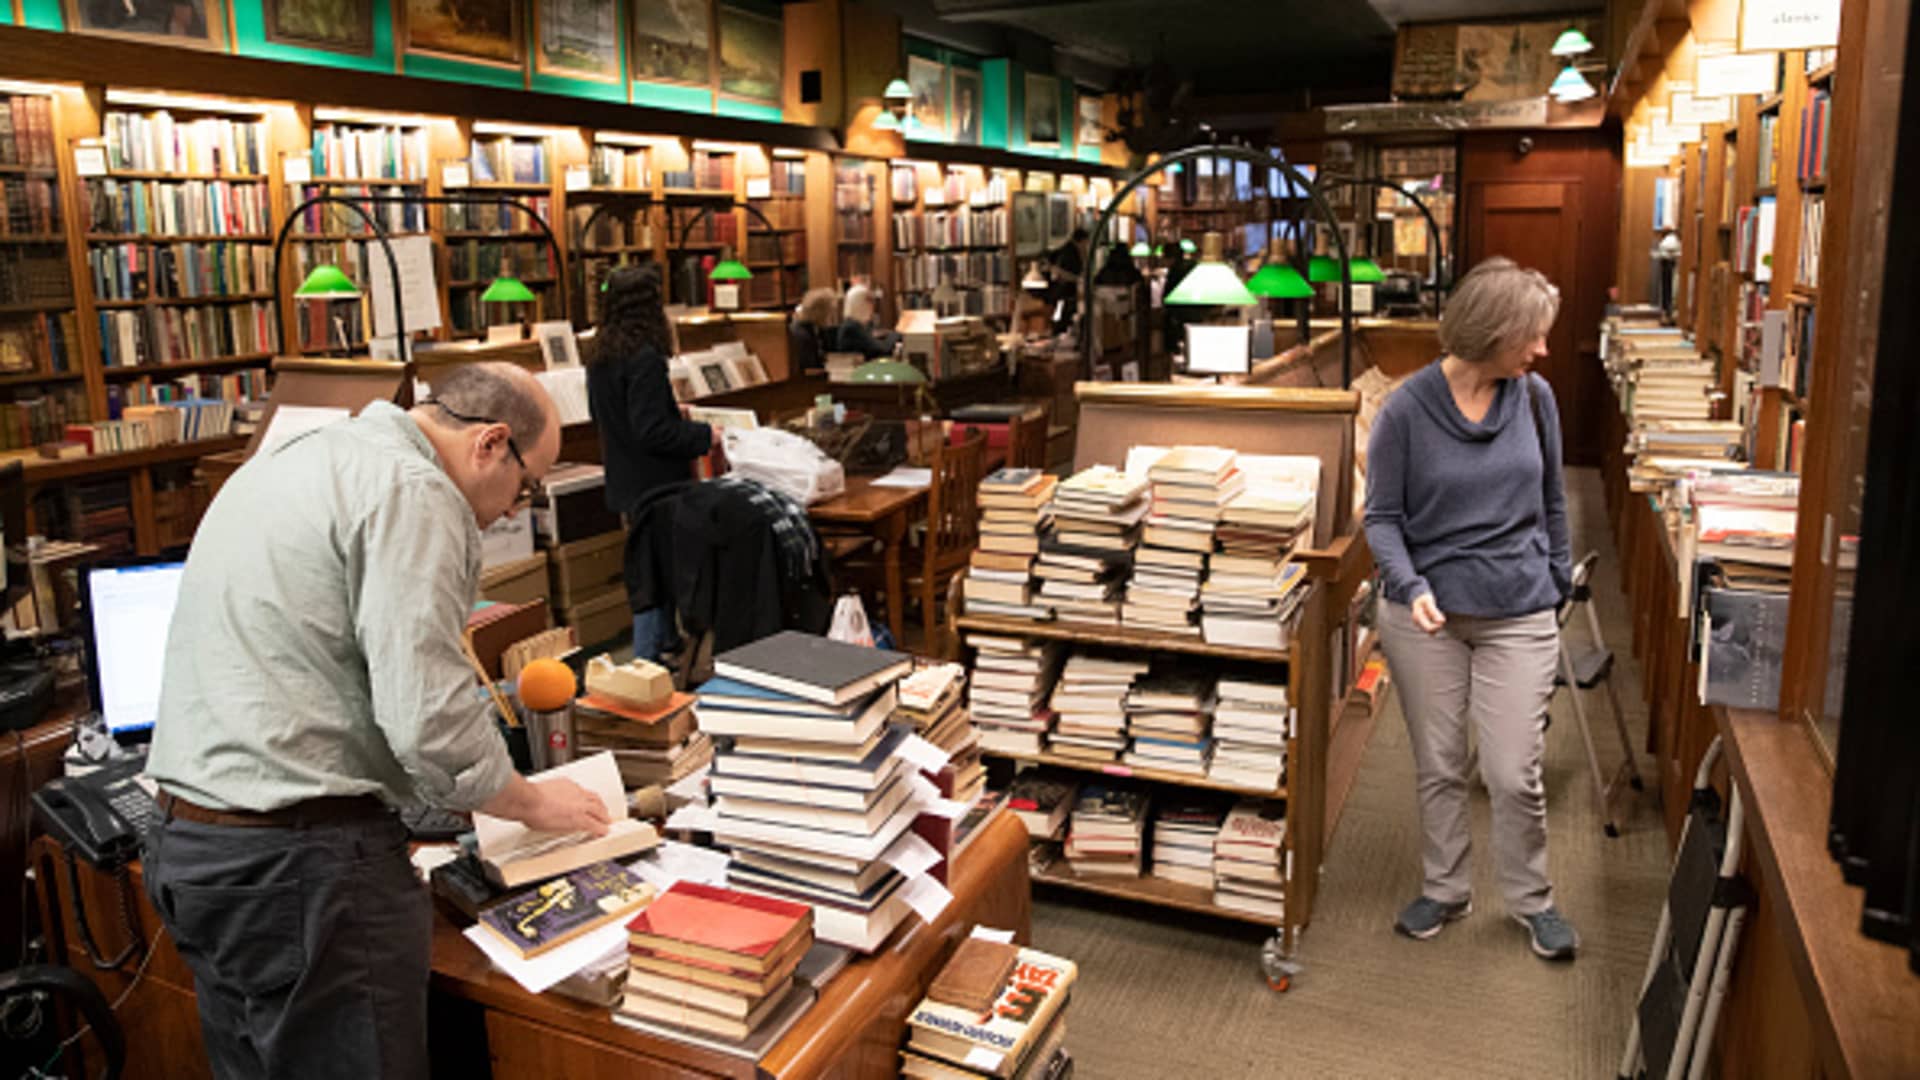 NEW YORK, NY - FEBRUARY 27: Customers shop for books at the Argosy Book Store, the New York City's oldest independent bookstore which was founded in 1925, on February 27, 2023 in New York City. (Photo by Liao Pan/China News Service/VCG via Getty Images)